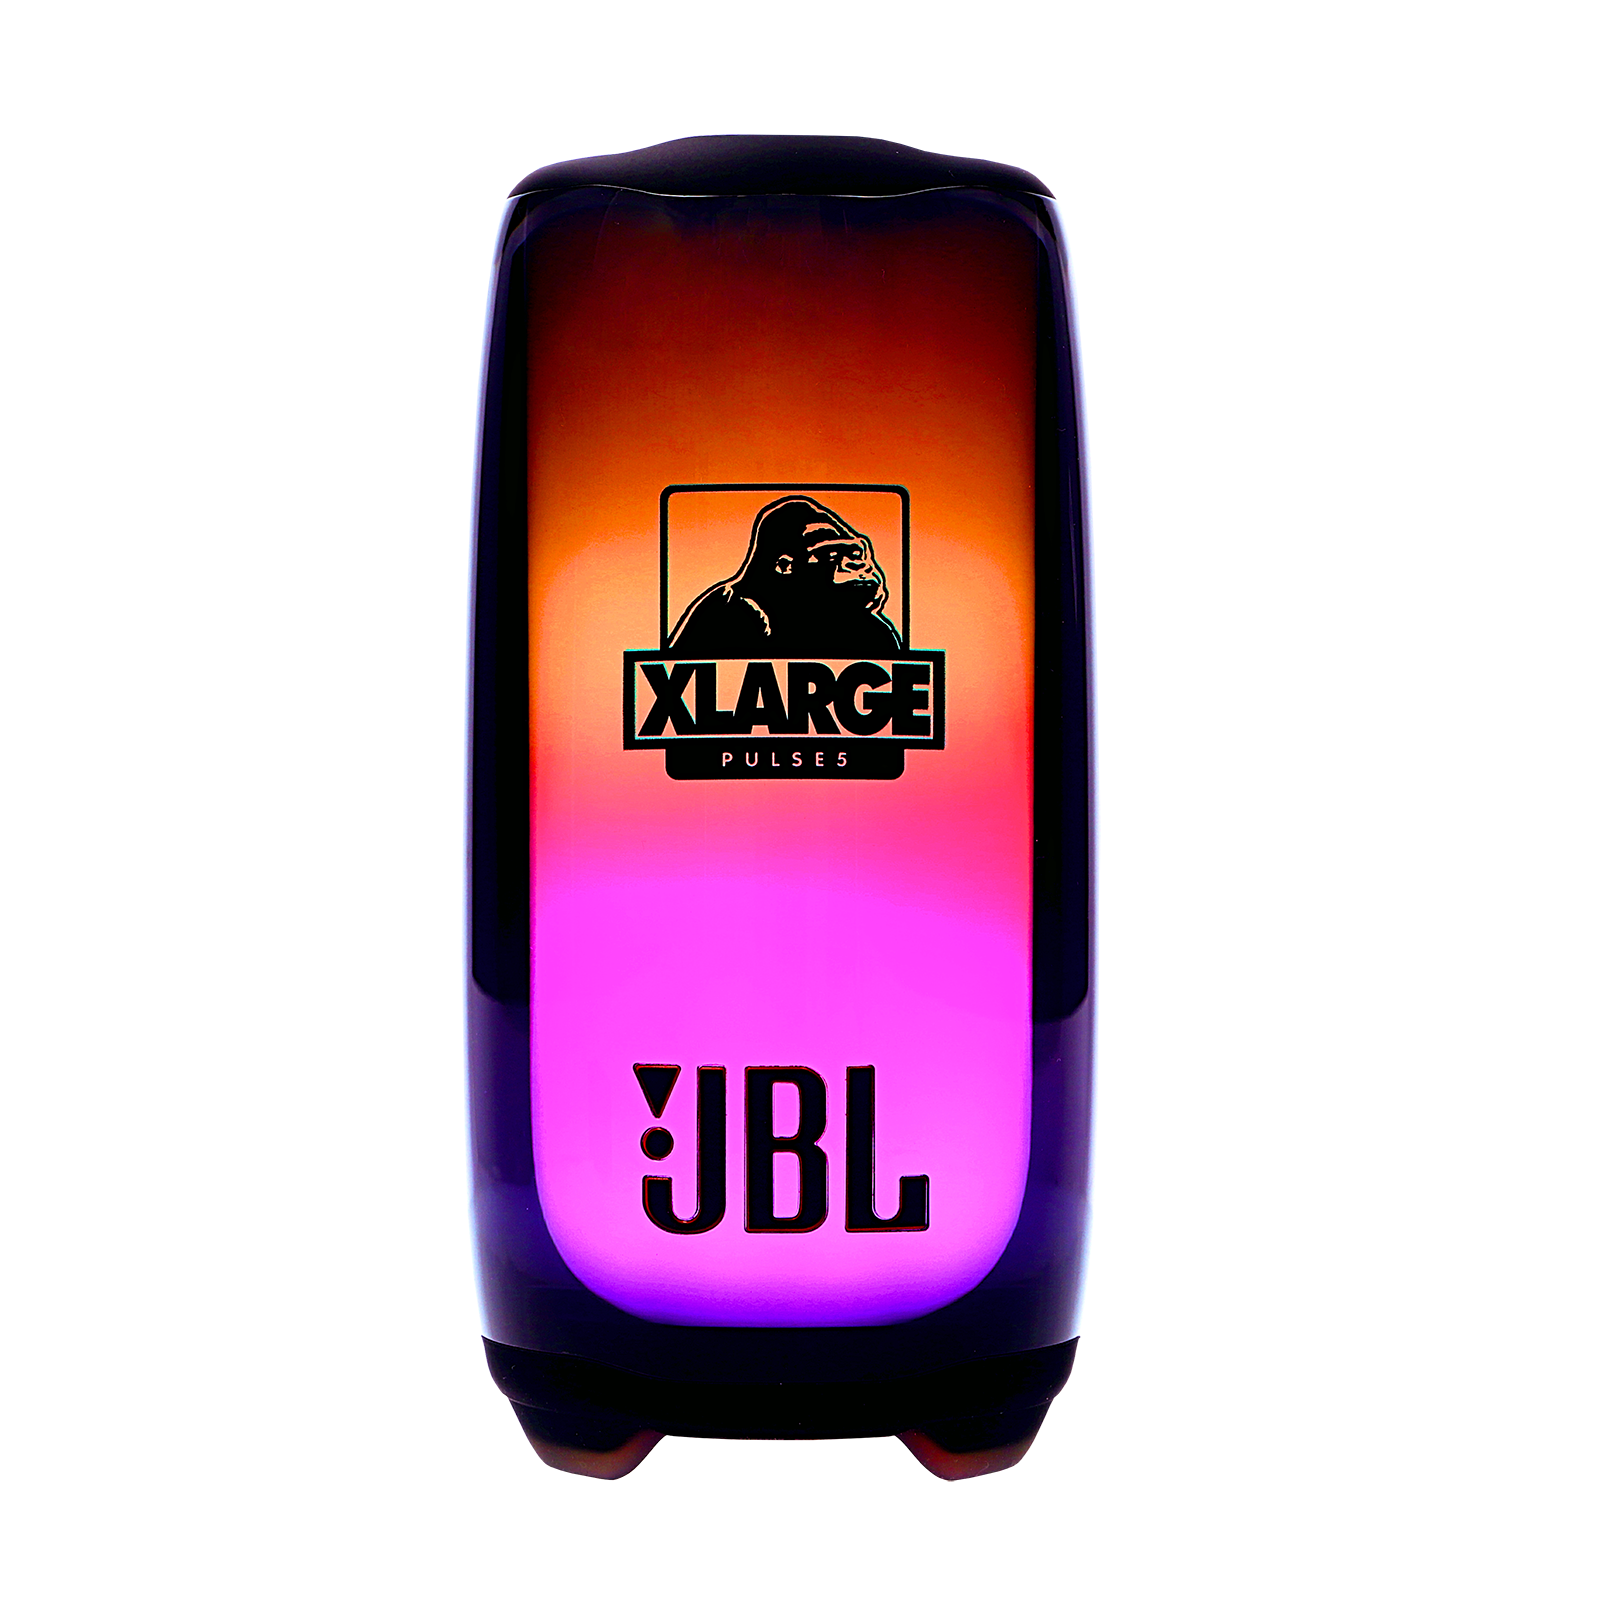 JBL PULSE 5 XLARGE Special Edition